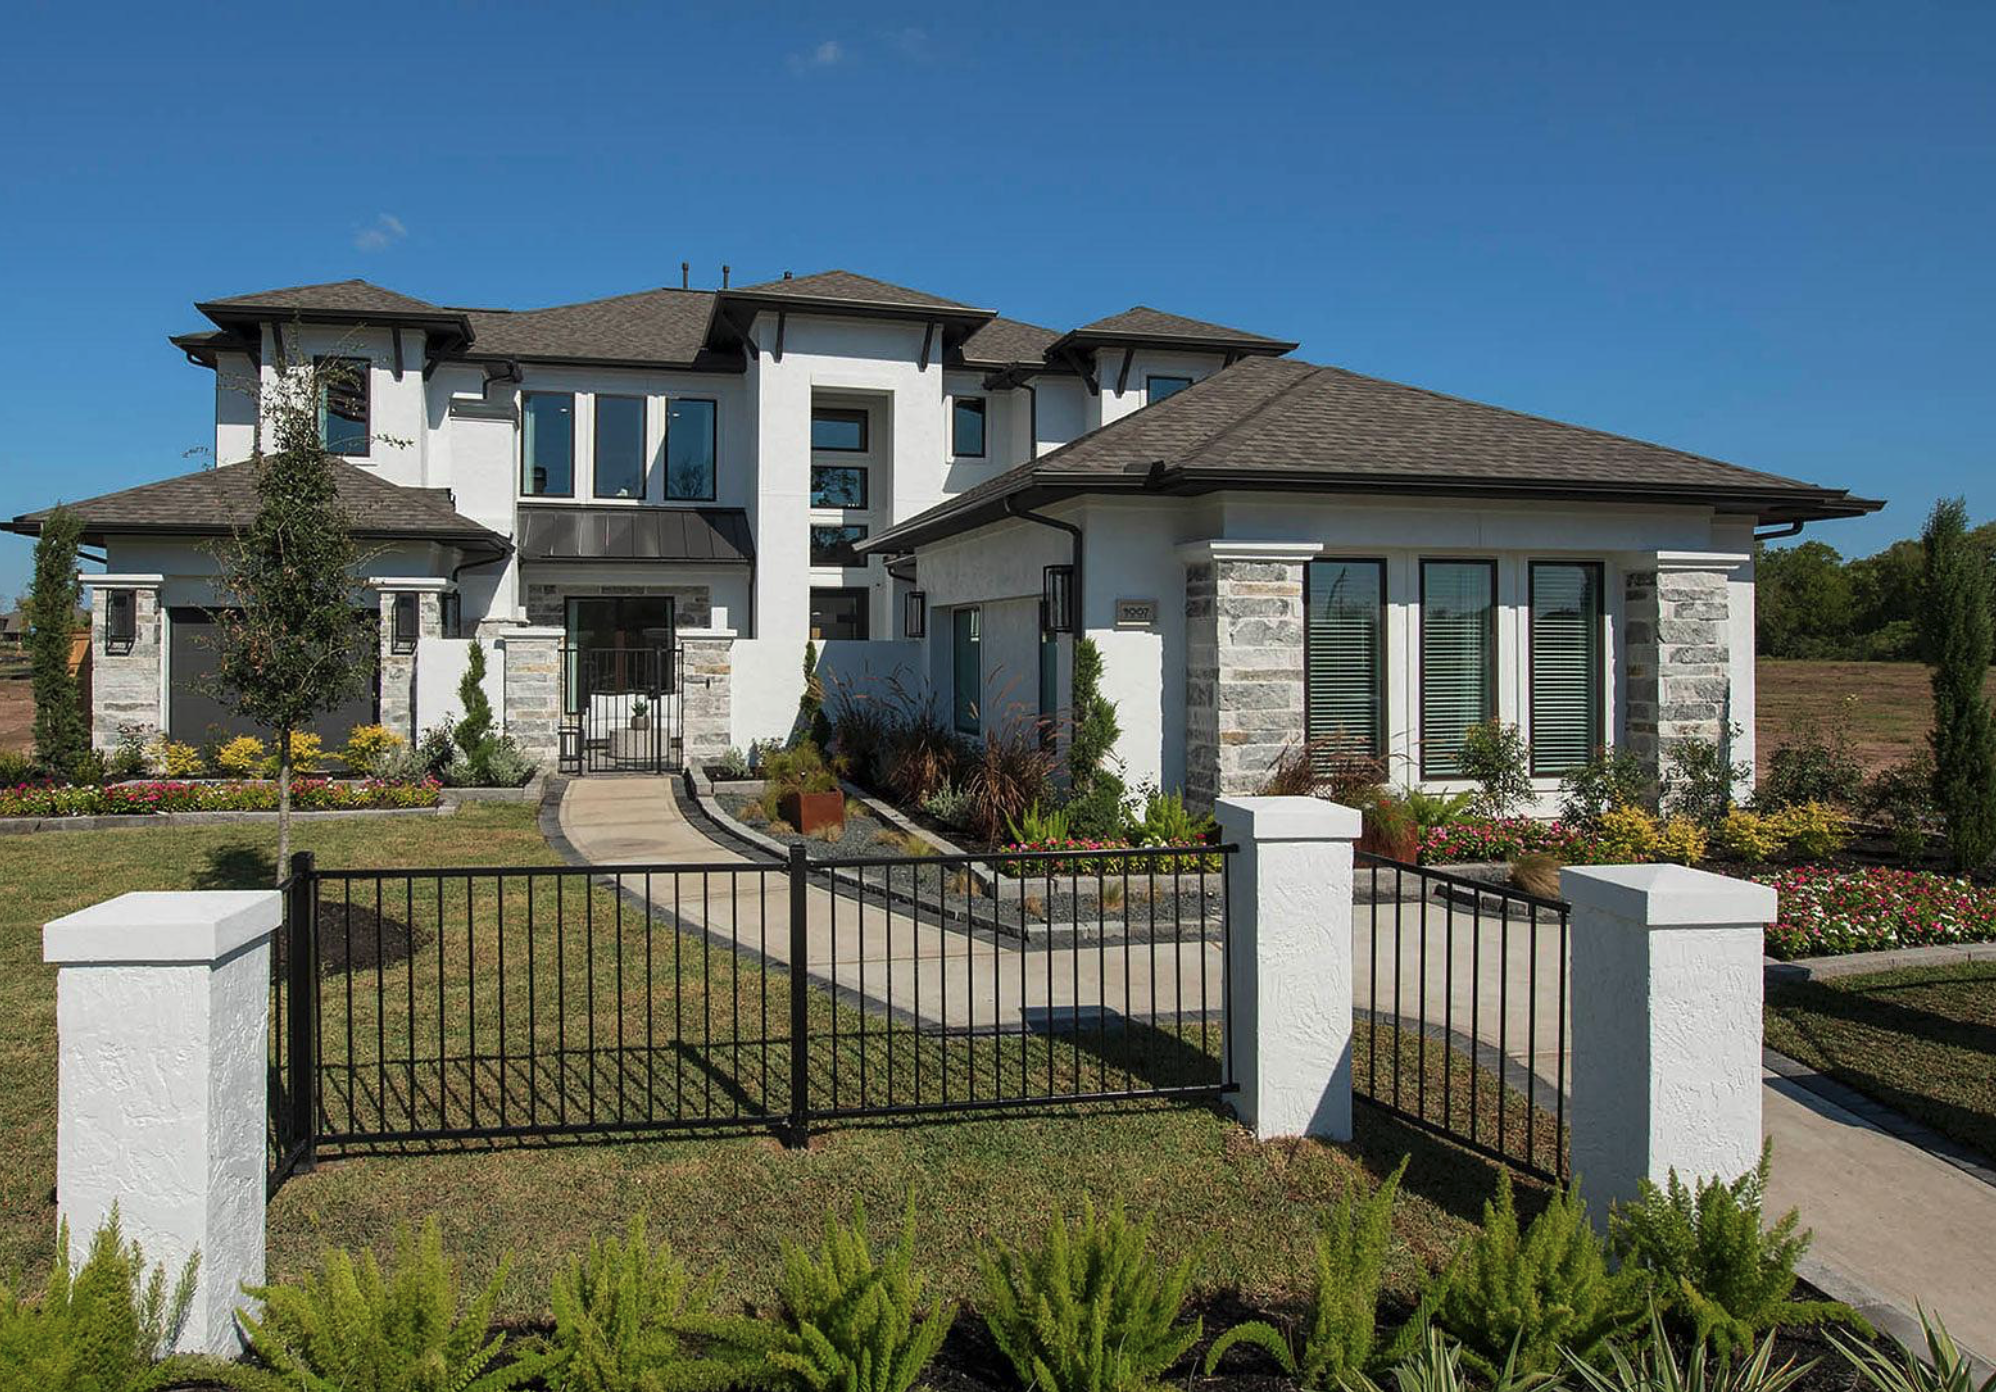 Perry Homes' New Sienna Model Homes in Fort Bend County